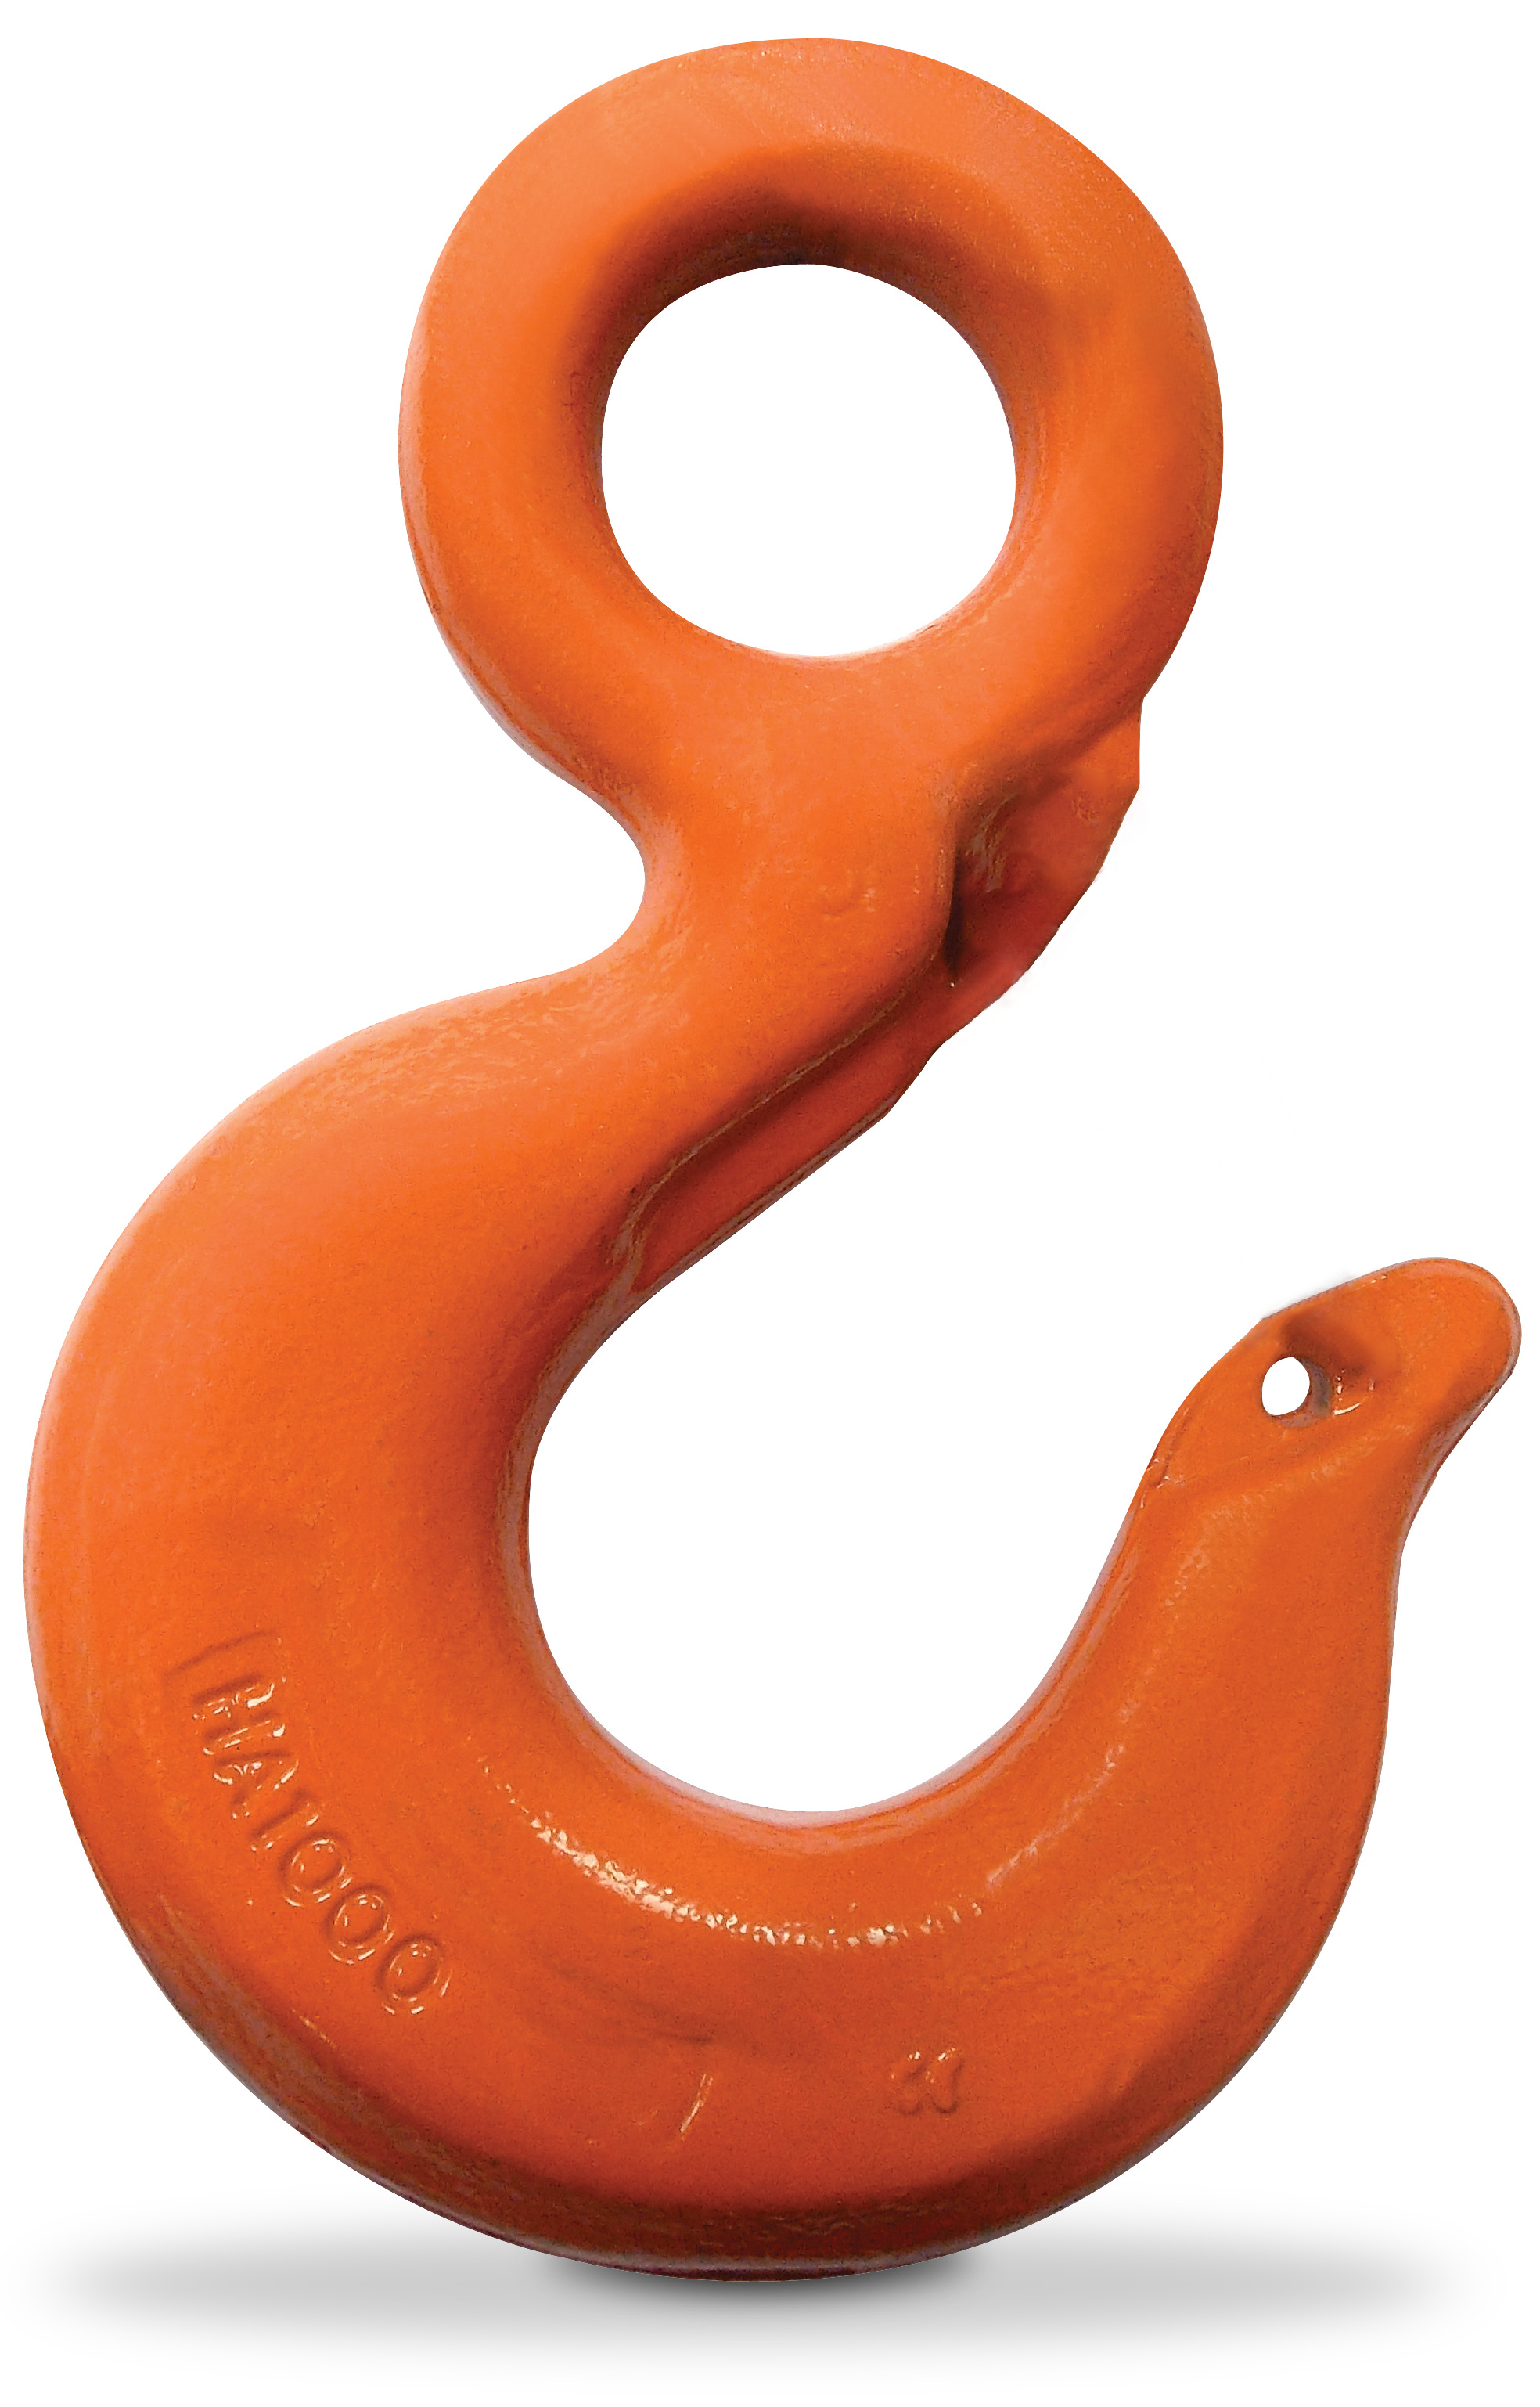 https://tsriggingequipment.com/store/images/thumbs/0003501_cm-dual-rated-rigging-hook-working-load-limit-4300-lbs-part-no-m7403a.png